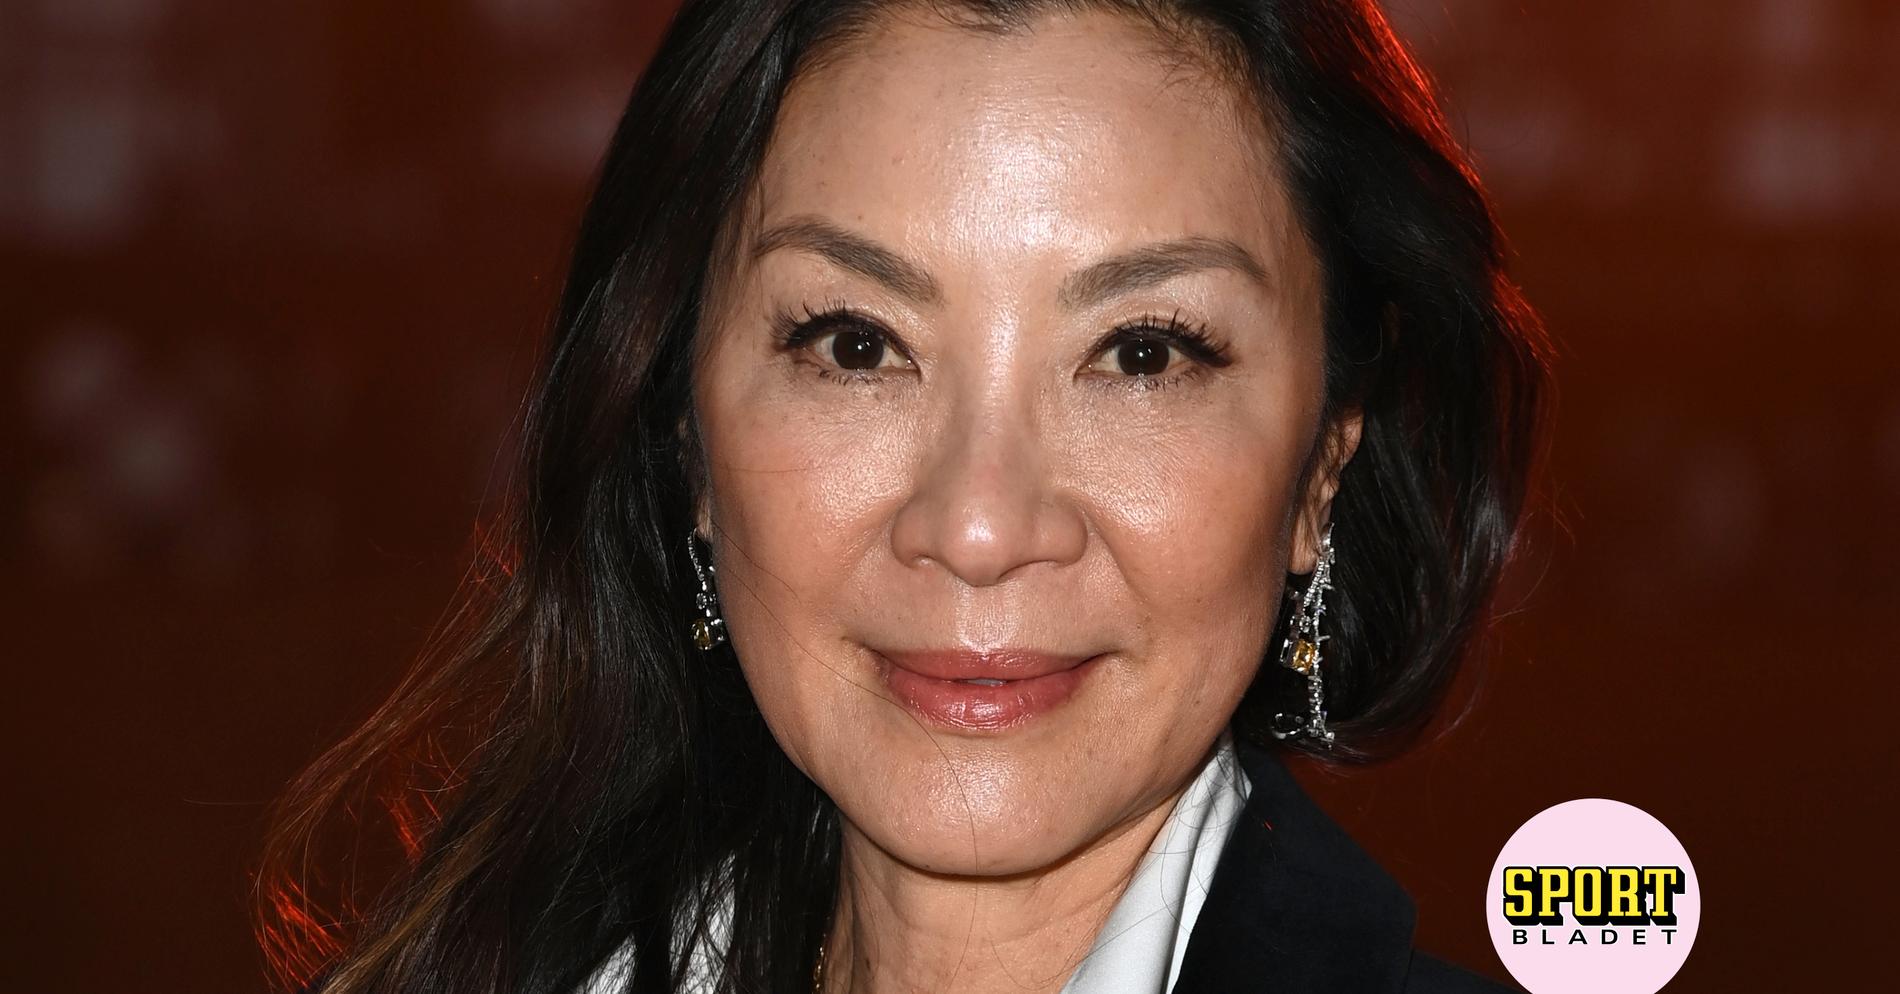 Former Bond Actress Michelle Yeoh to Join IOC Committee: Strengthening the IOC’s Commitment to Gender Equality